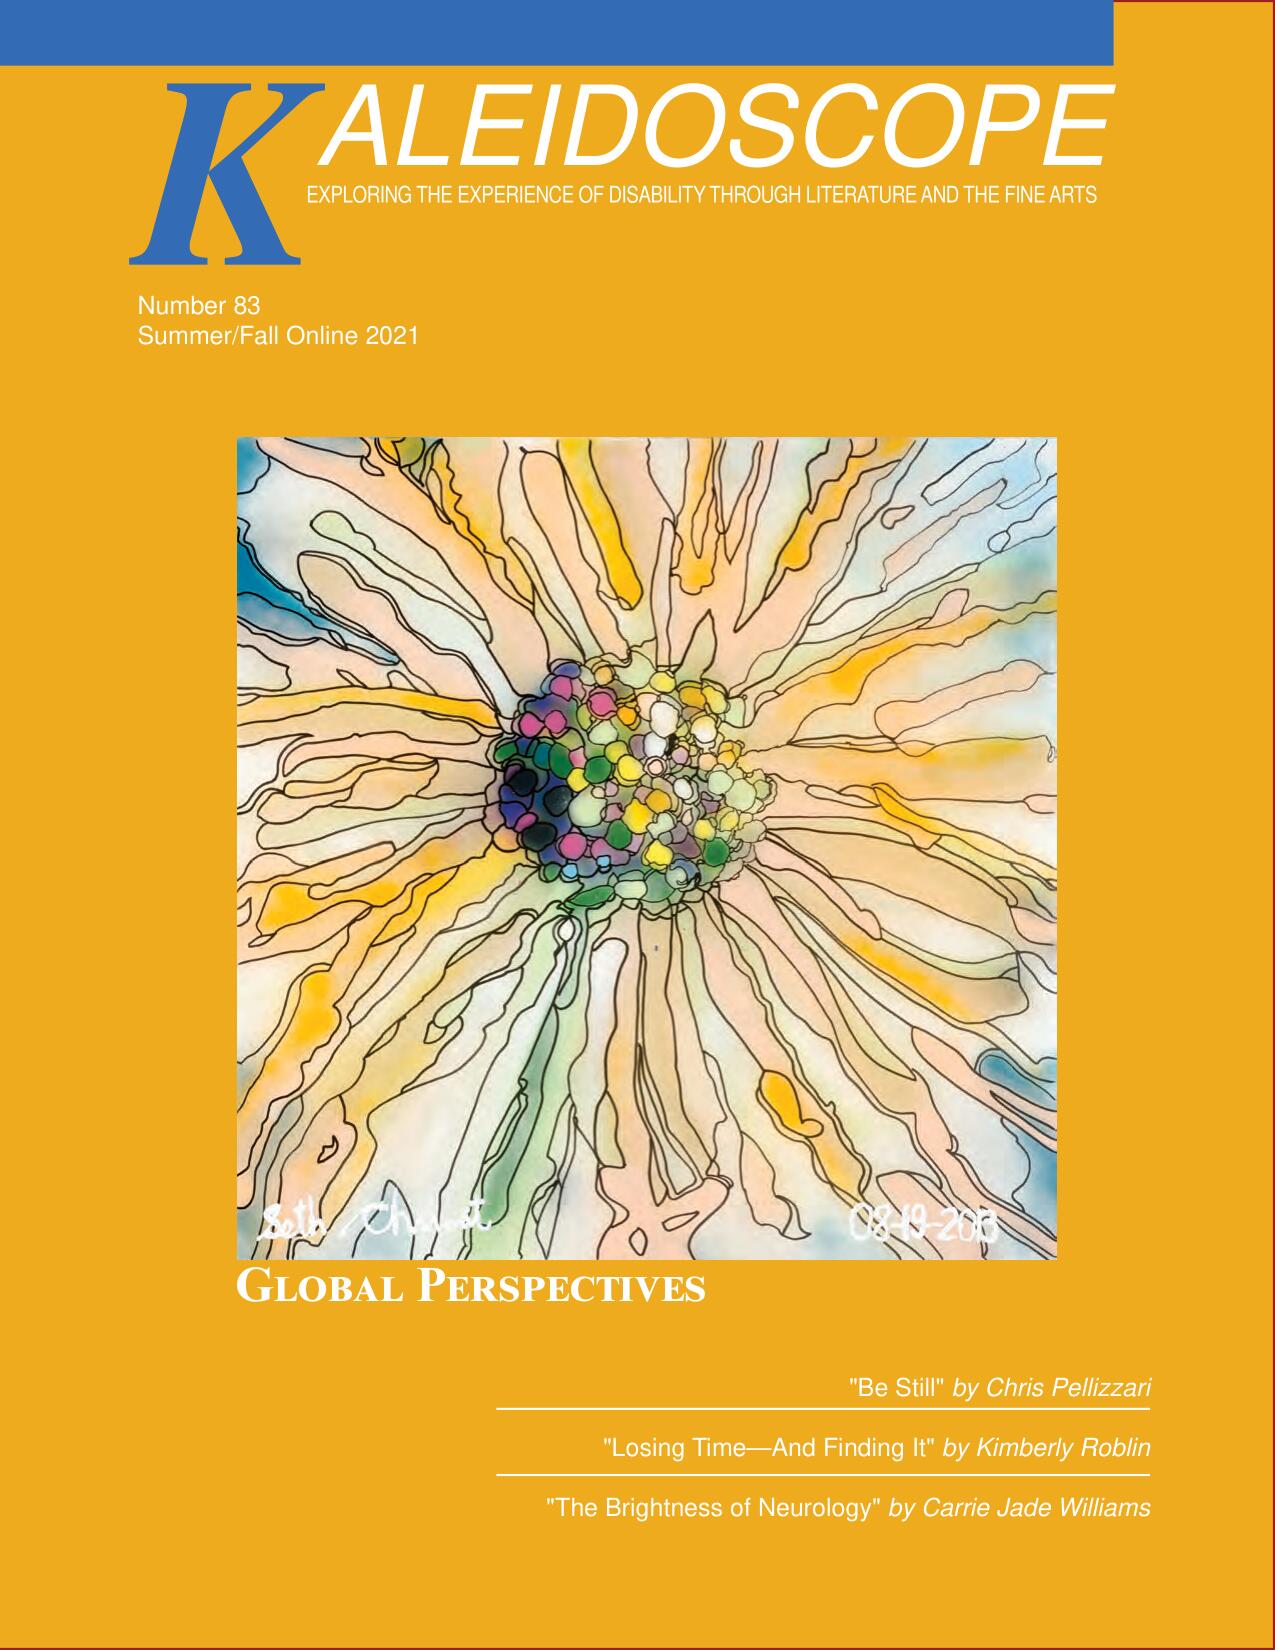 Cover of Kaleidoscope Issue 83. Orange background and a floral painting in the center.